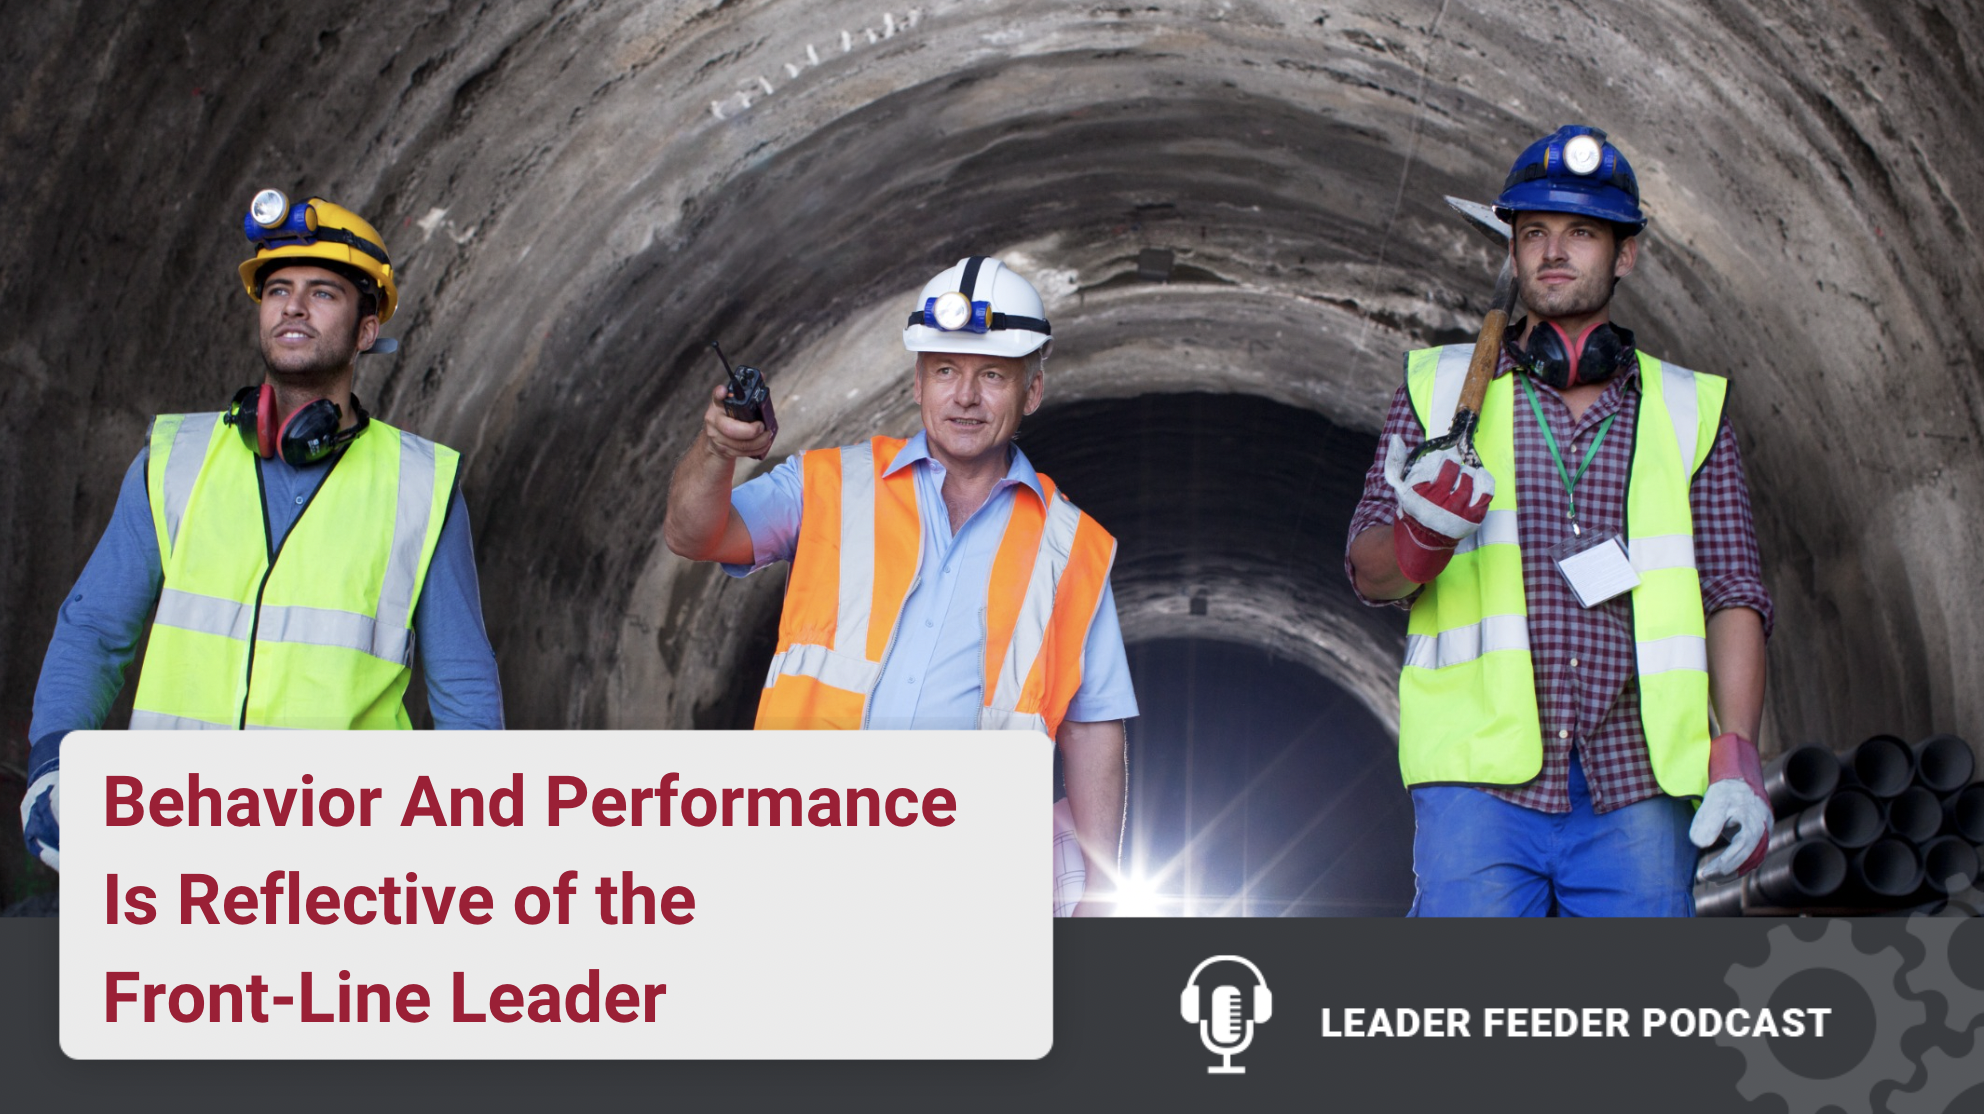 Behavior And Performance Is Reflective of the Front-Line Leader